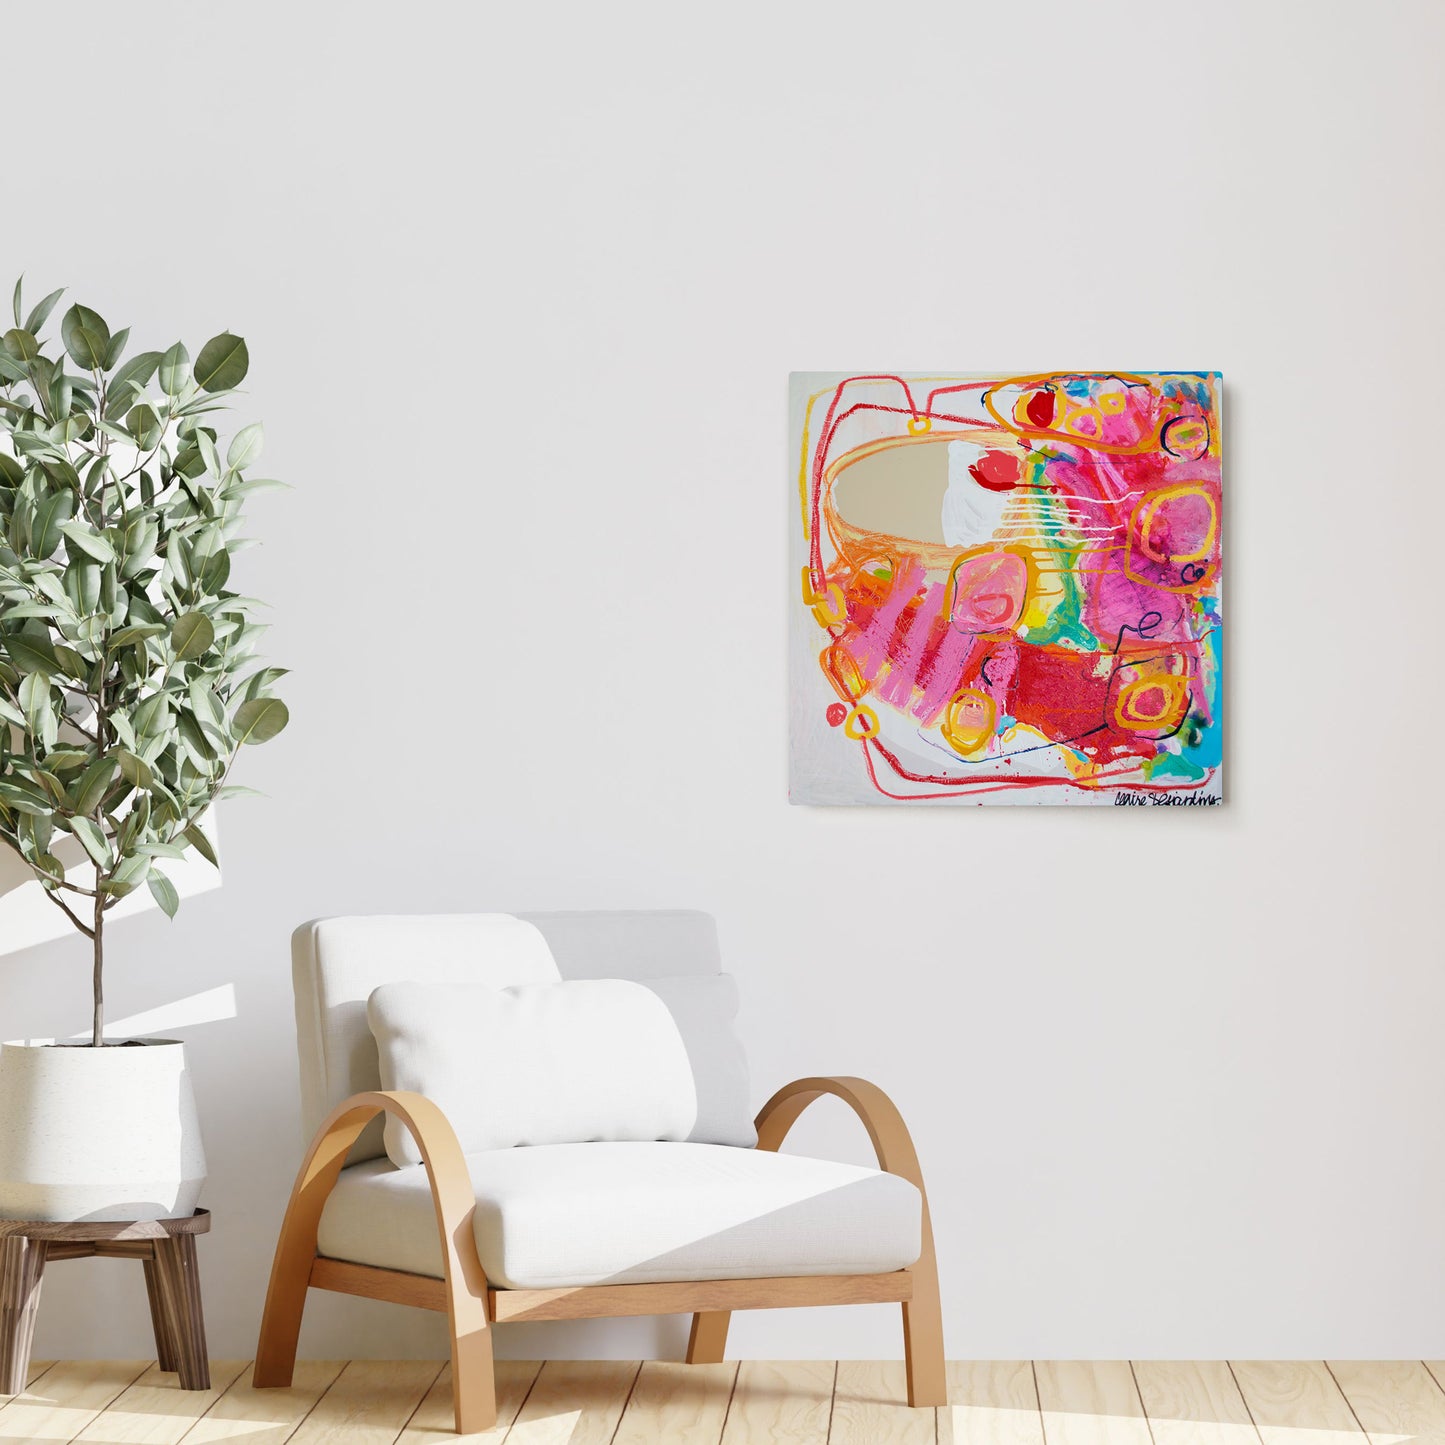  Claire Desjardins' Persuasion painting reproduced on HD metal print and displayed on wall